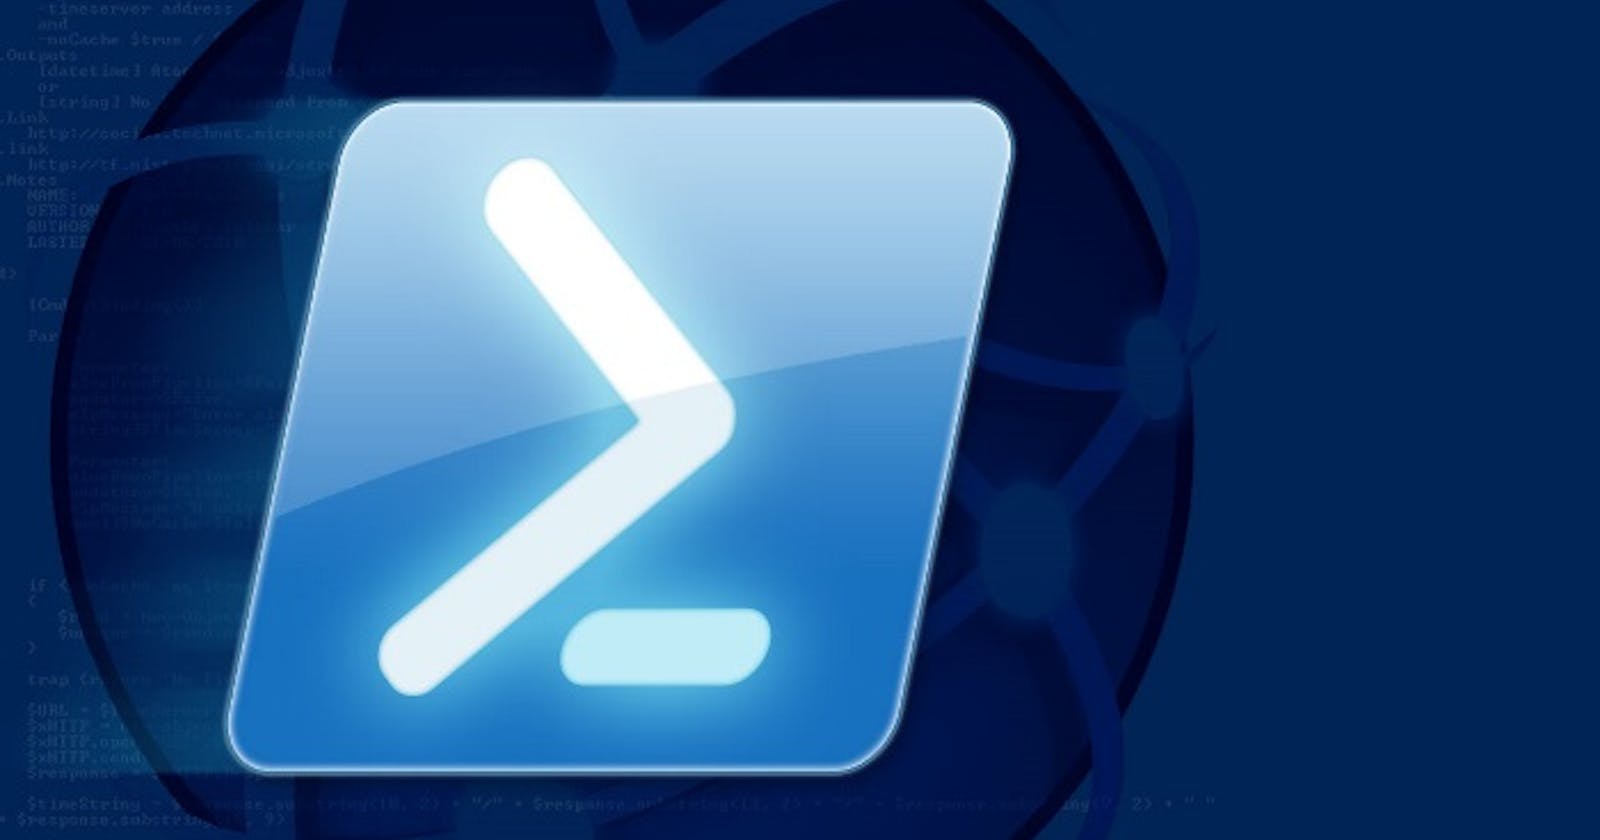 Getting PowerShell 5 Running on Windows 7 and Server 2008 R2